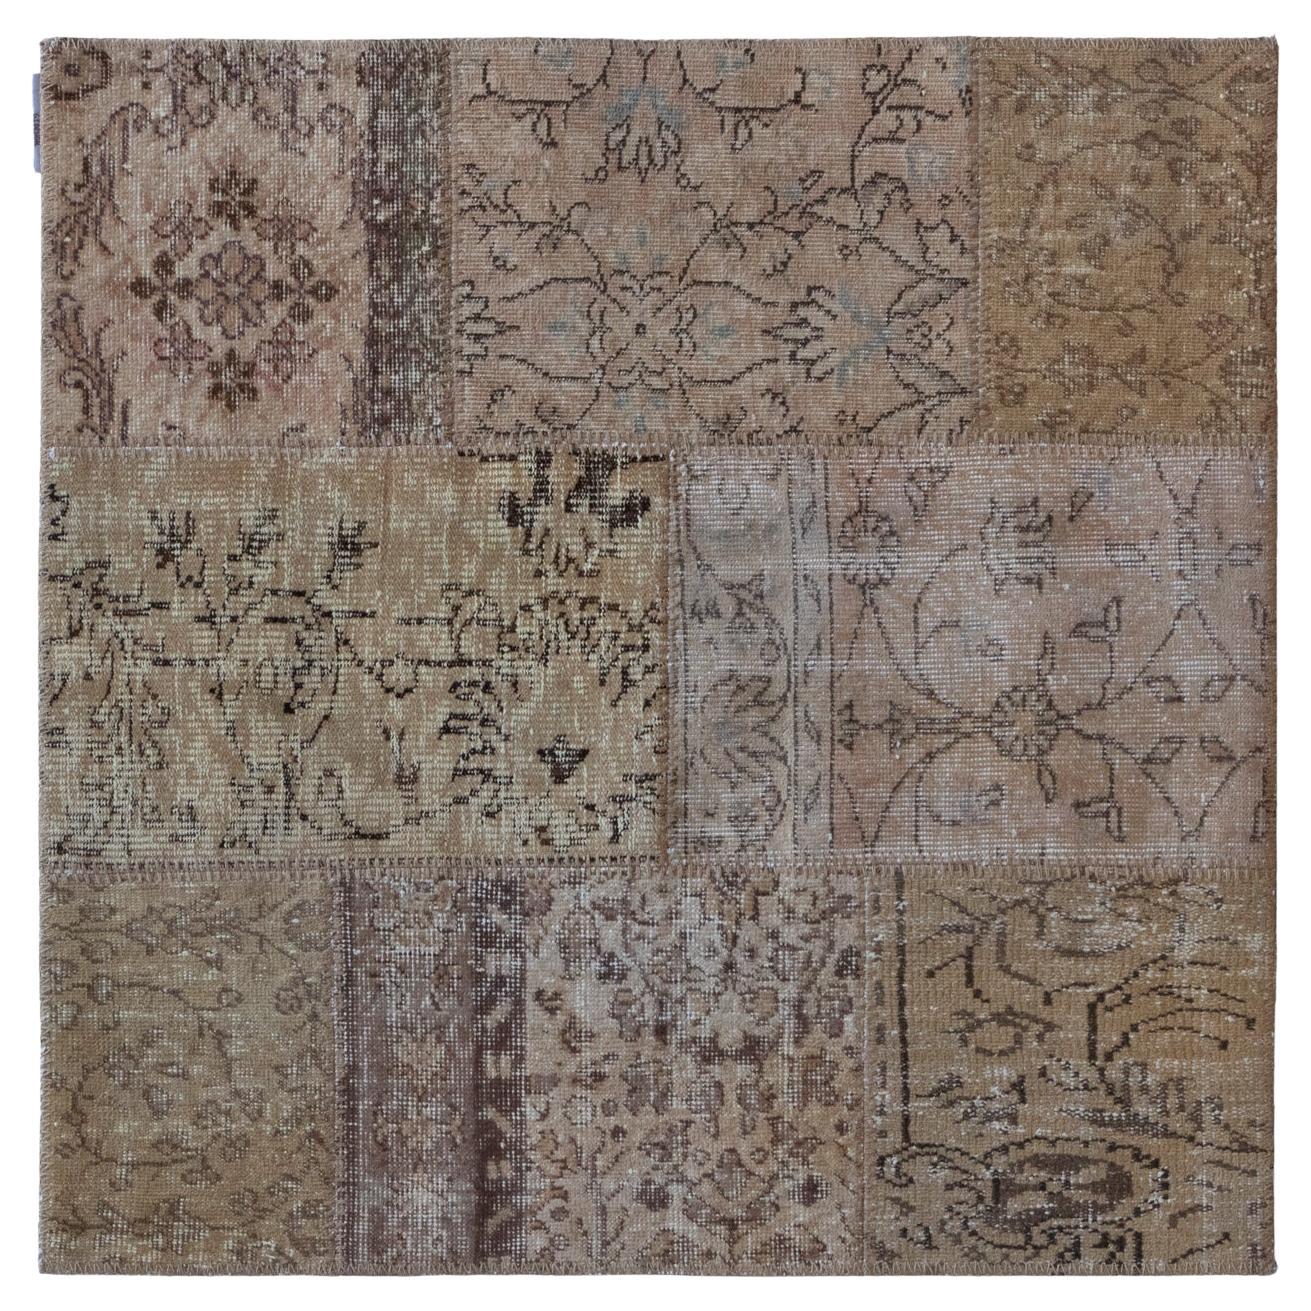 Nature Inspired Motifs Wool Cotton Rug by Deanna Comellini 120x120 cm